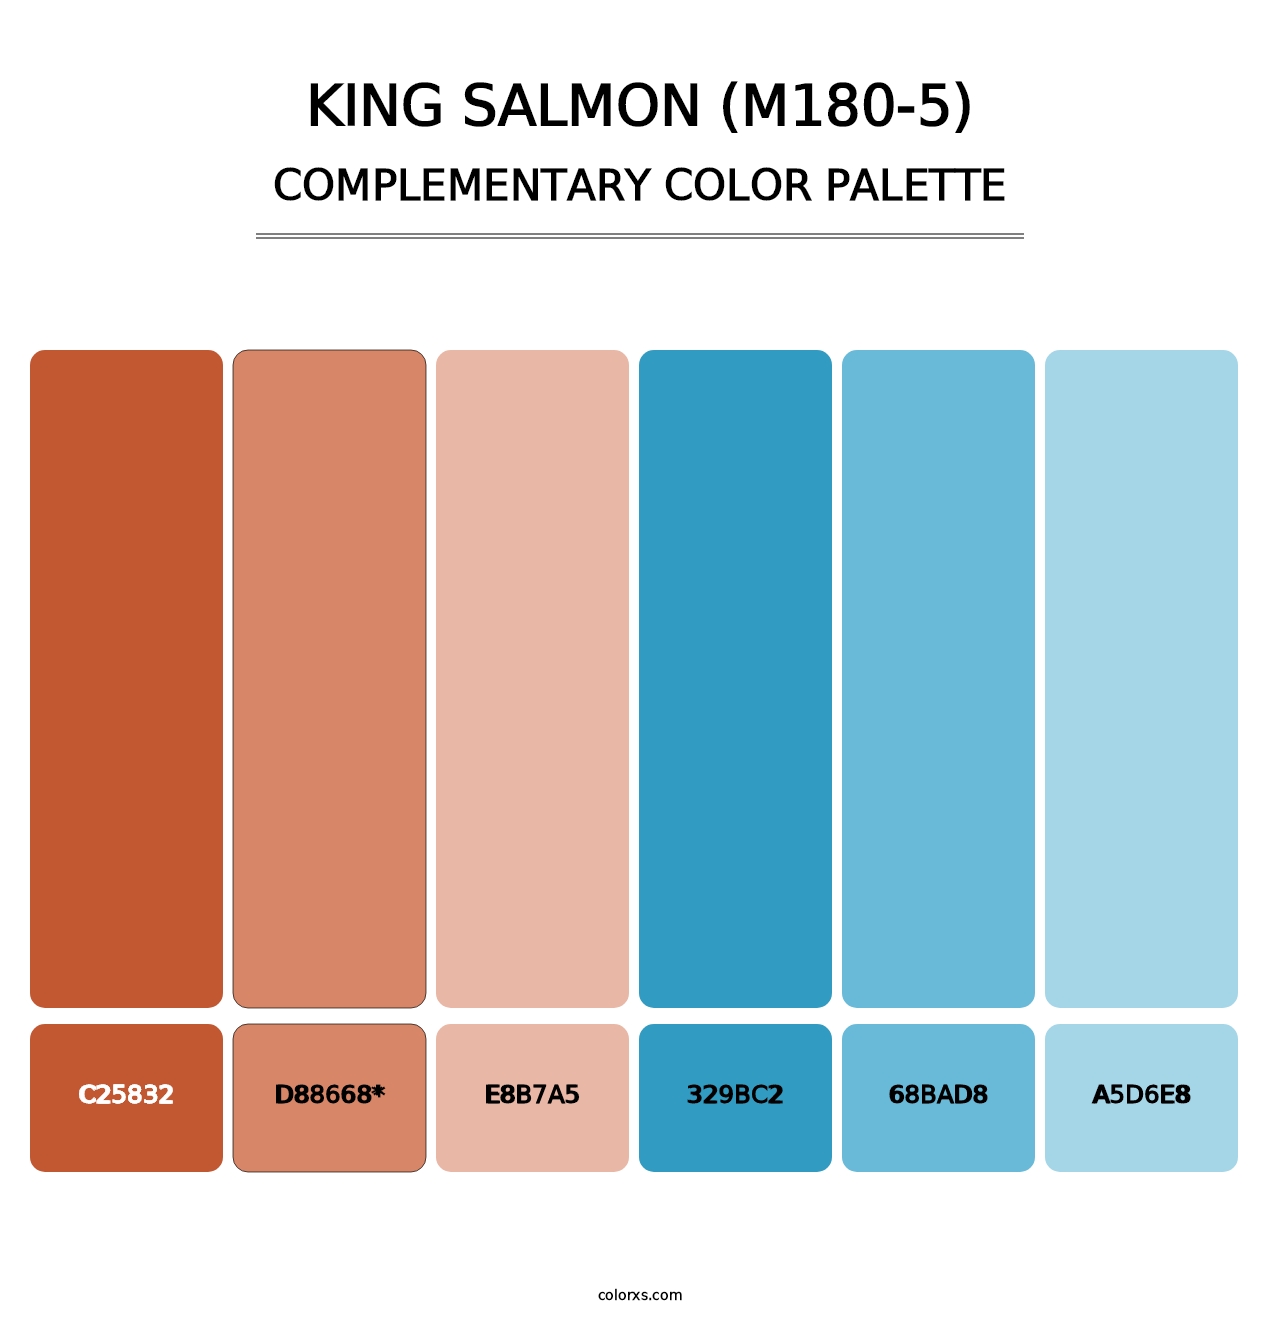 King Salmon (M180-5) - Complementary Color Palette